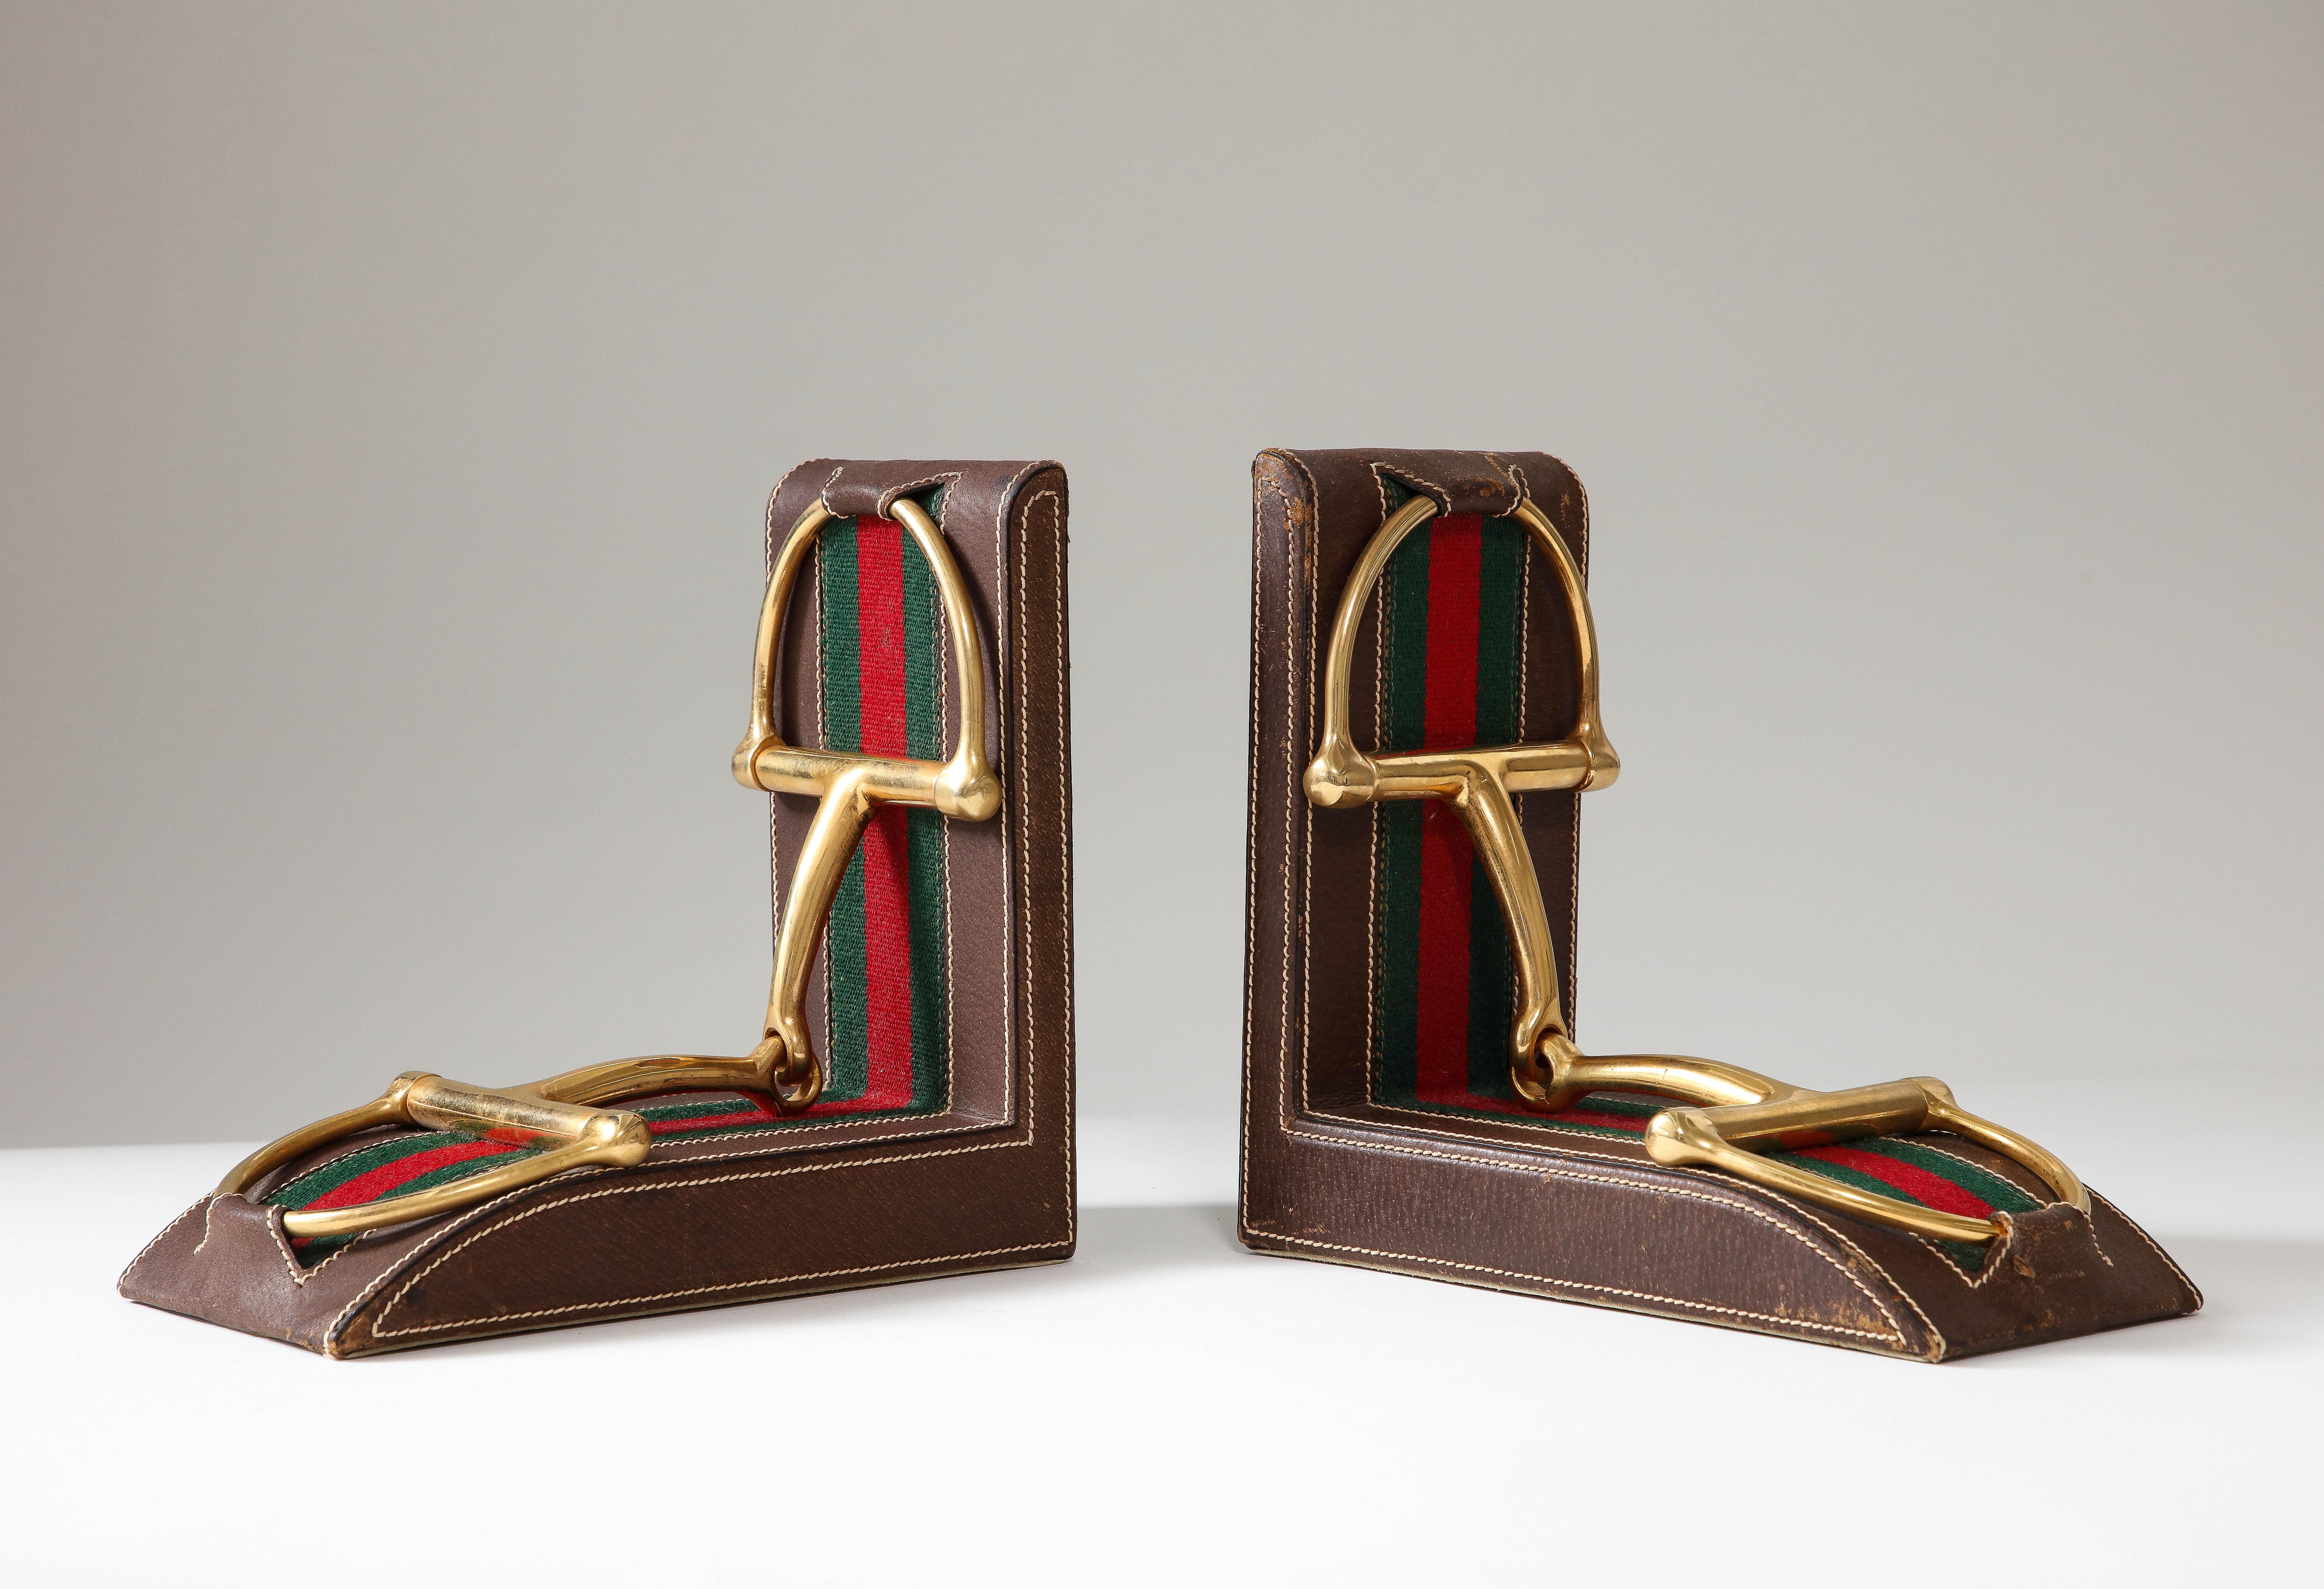 Pair of Leather and Brass Bookends, Gucci, Italy, c. 1970 For Sale 3